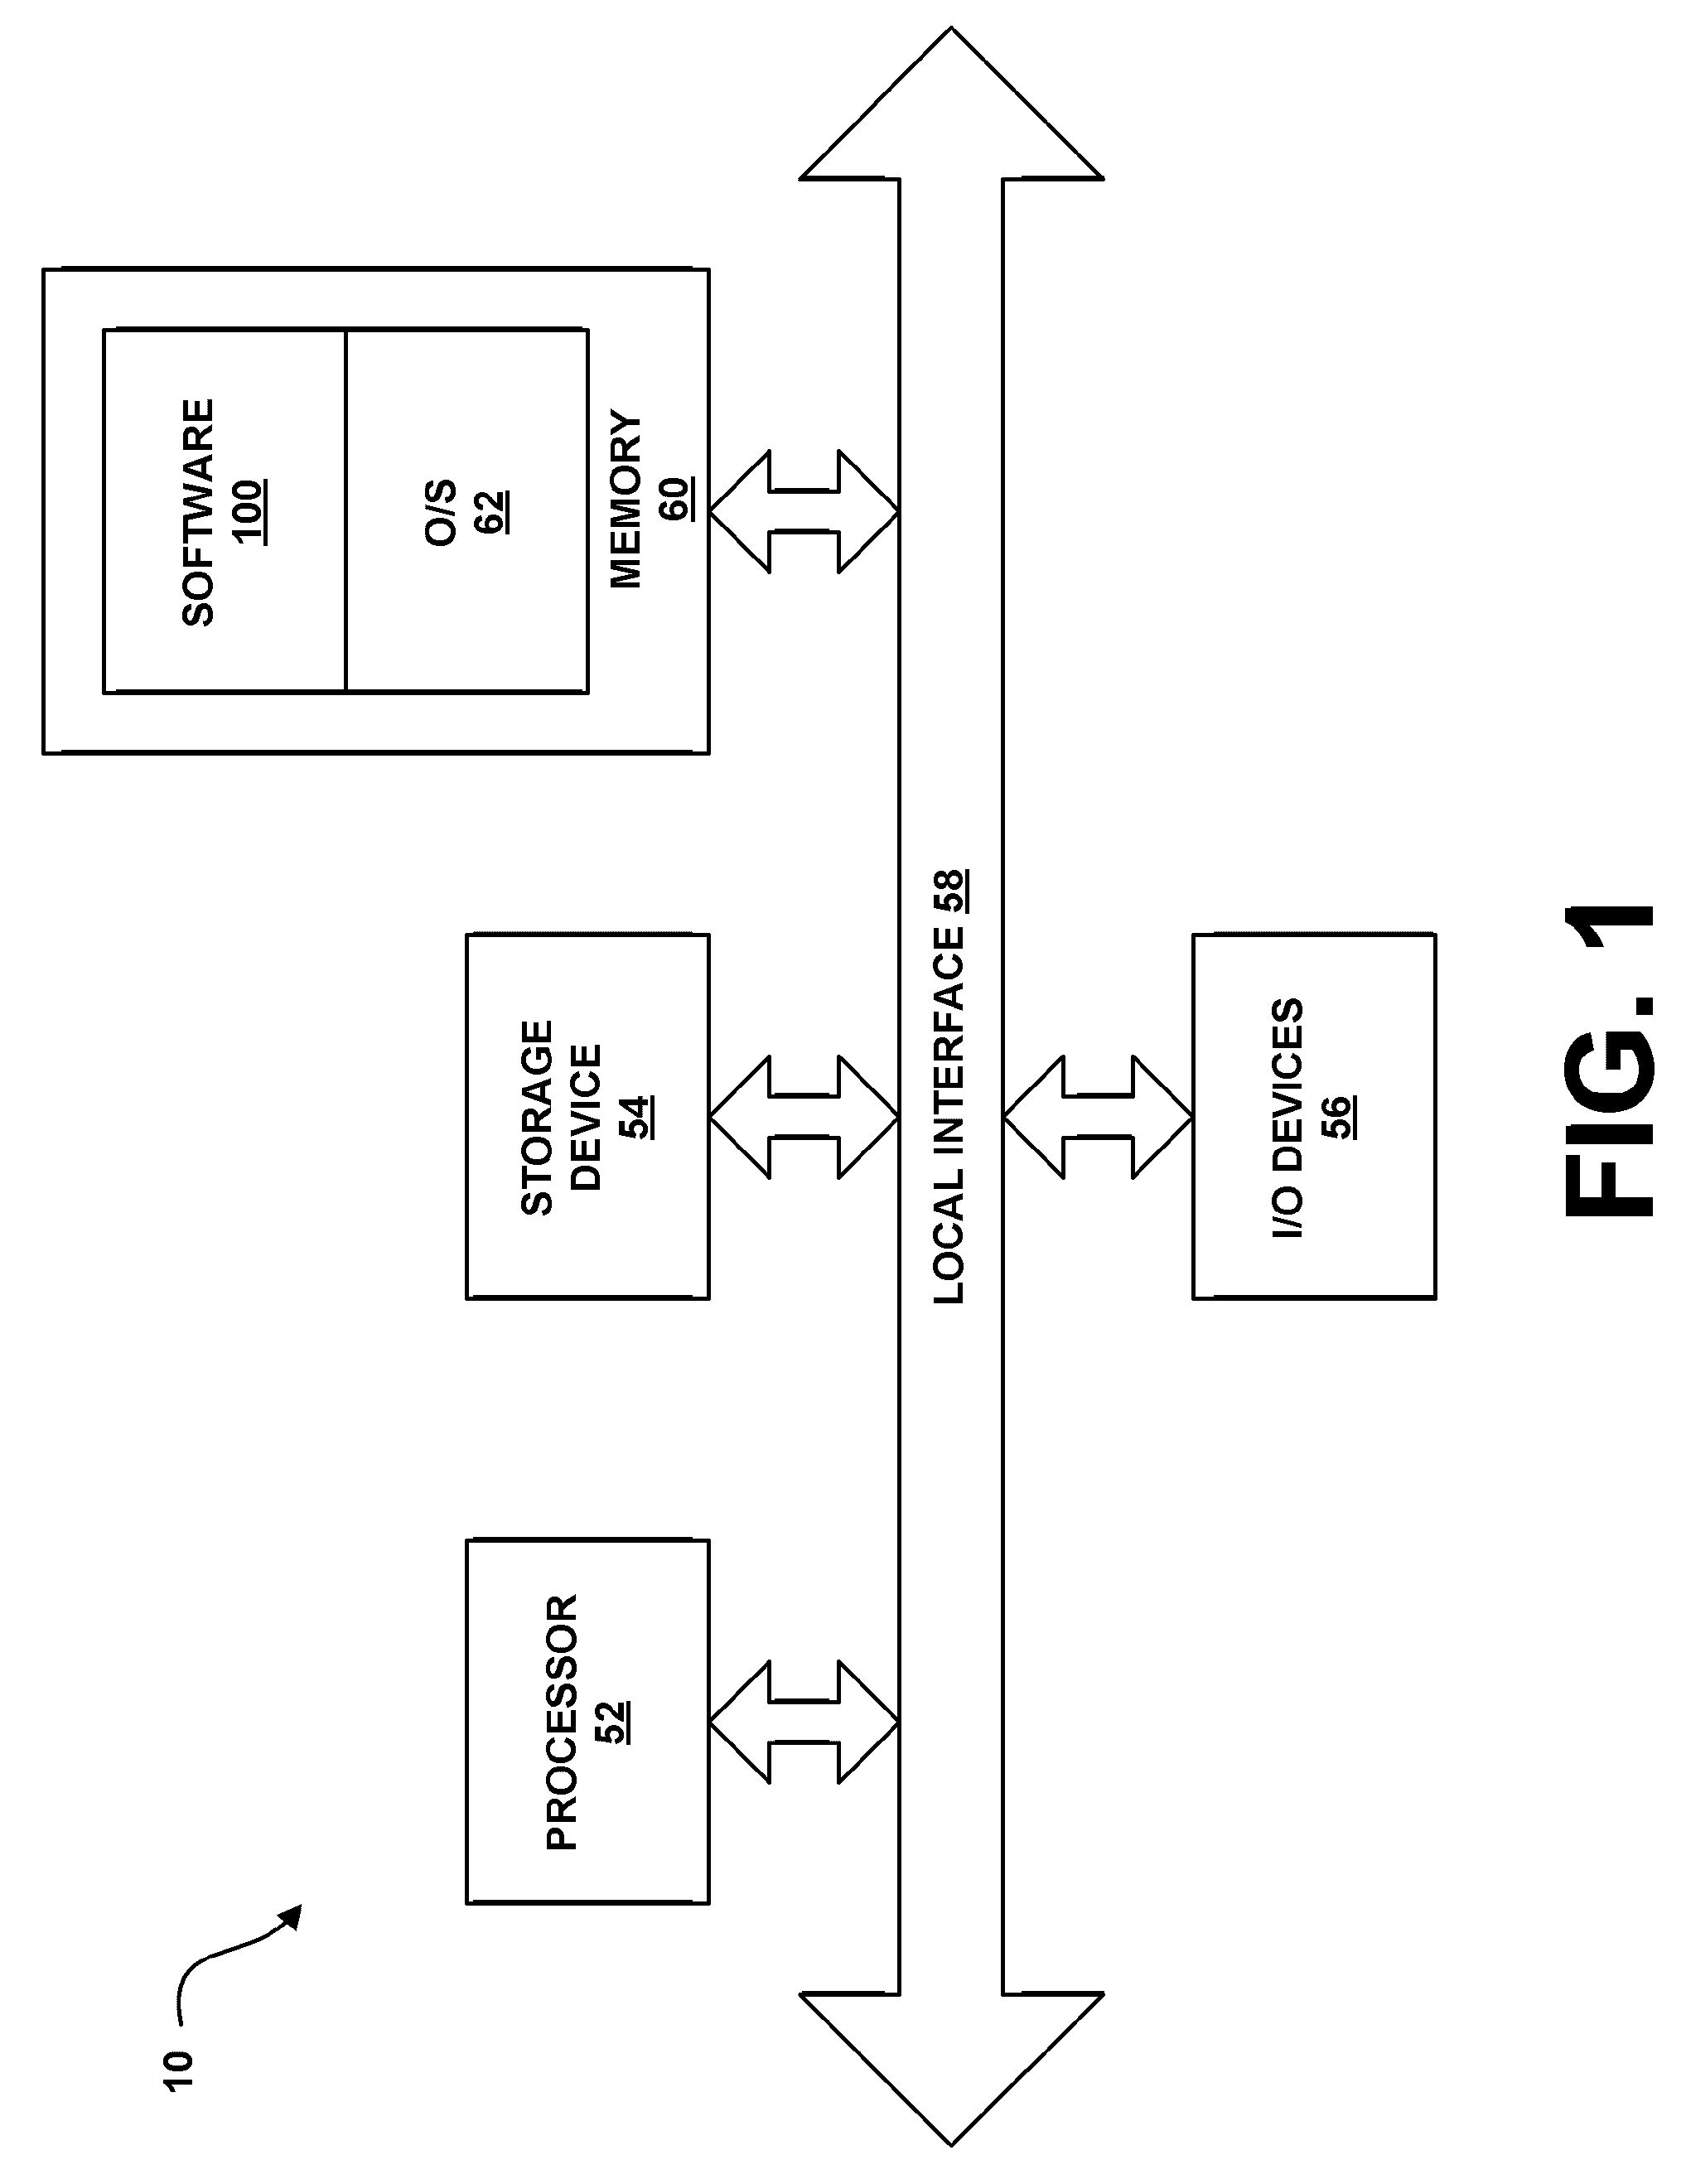 System and method for modeling supervisory control of heterogeneous unmanned vehicles through discrete event simulation